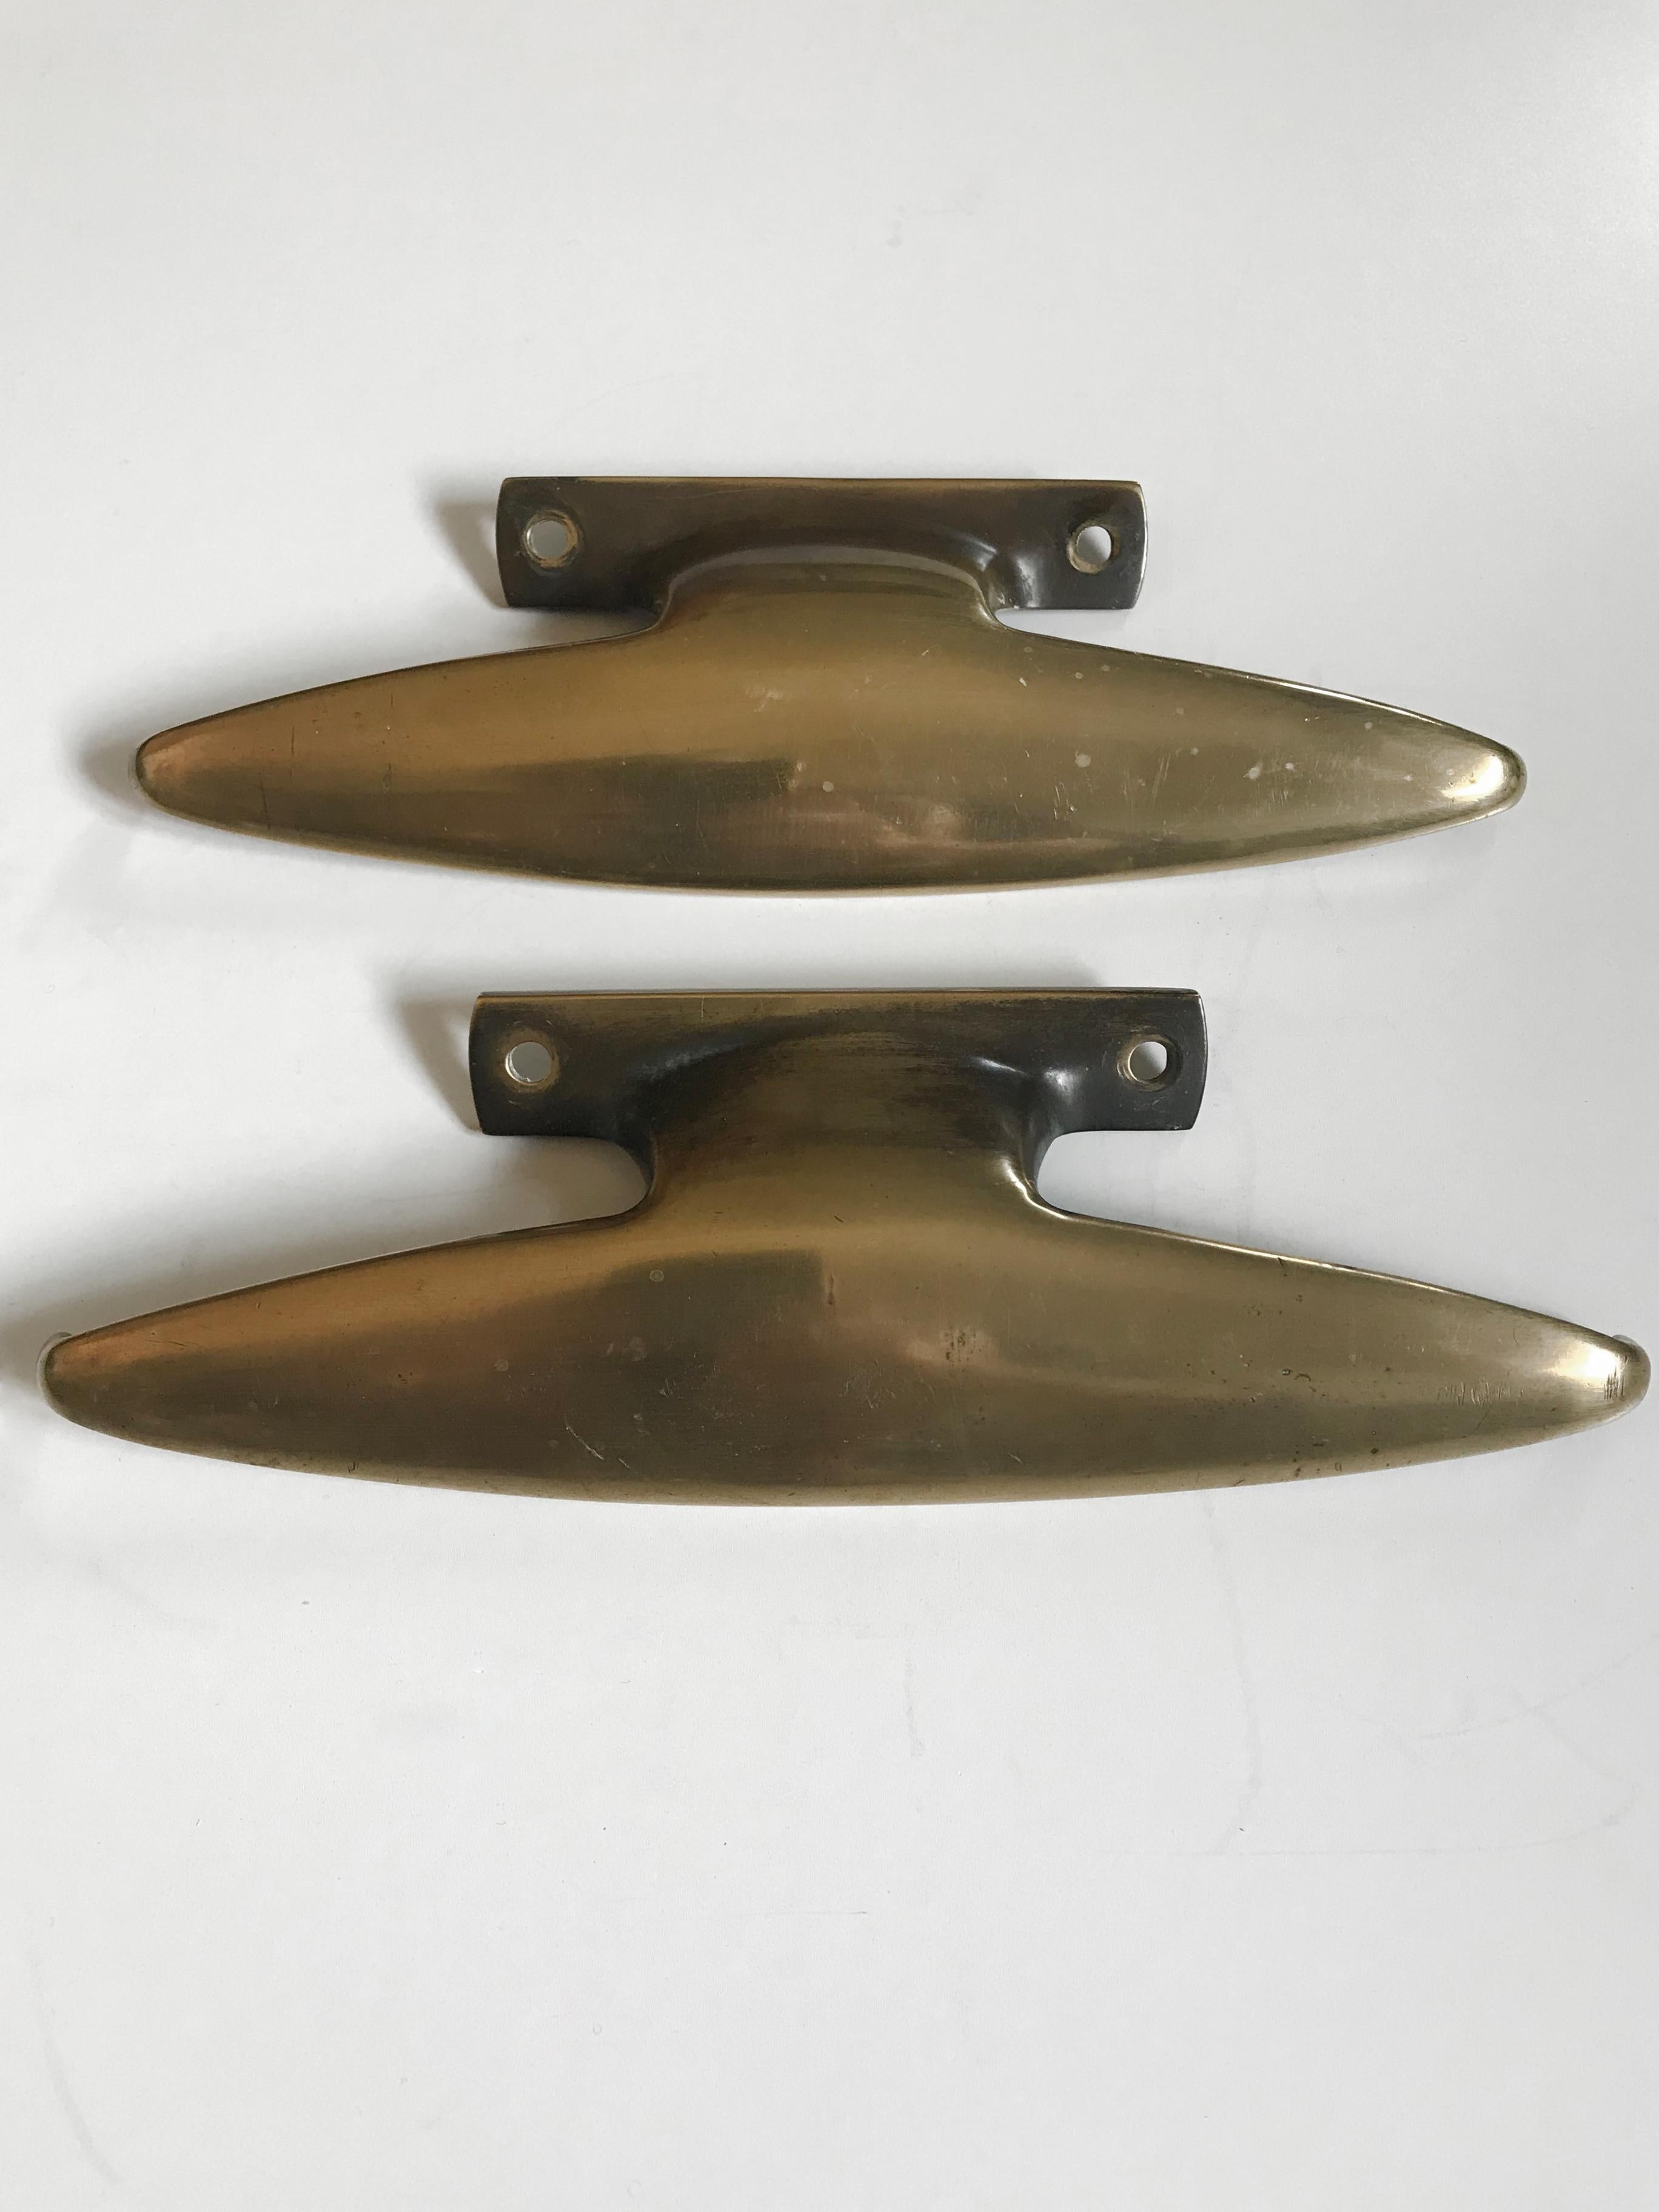 Set of two amazing Italian solid brass door handles, 1950s

Please note that the items are original of the period and this shows normal signs of age and use.